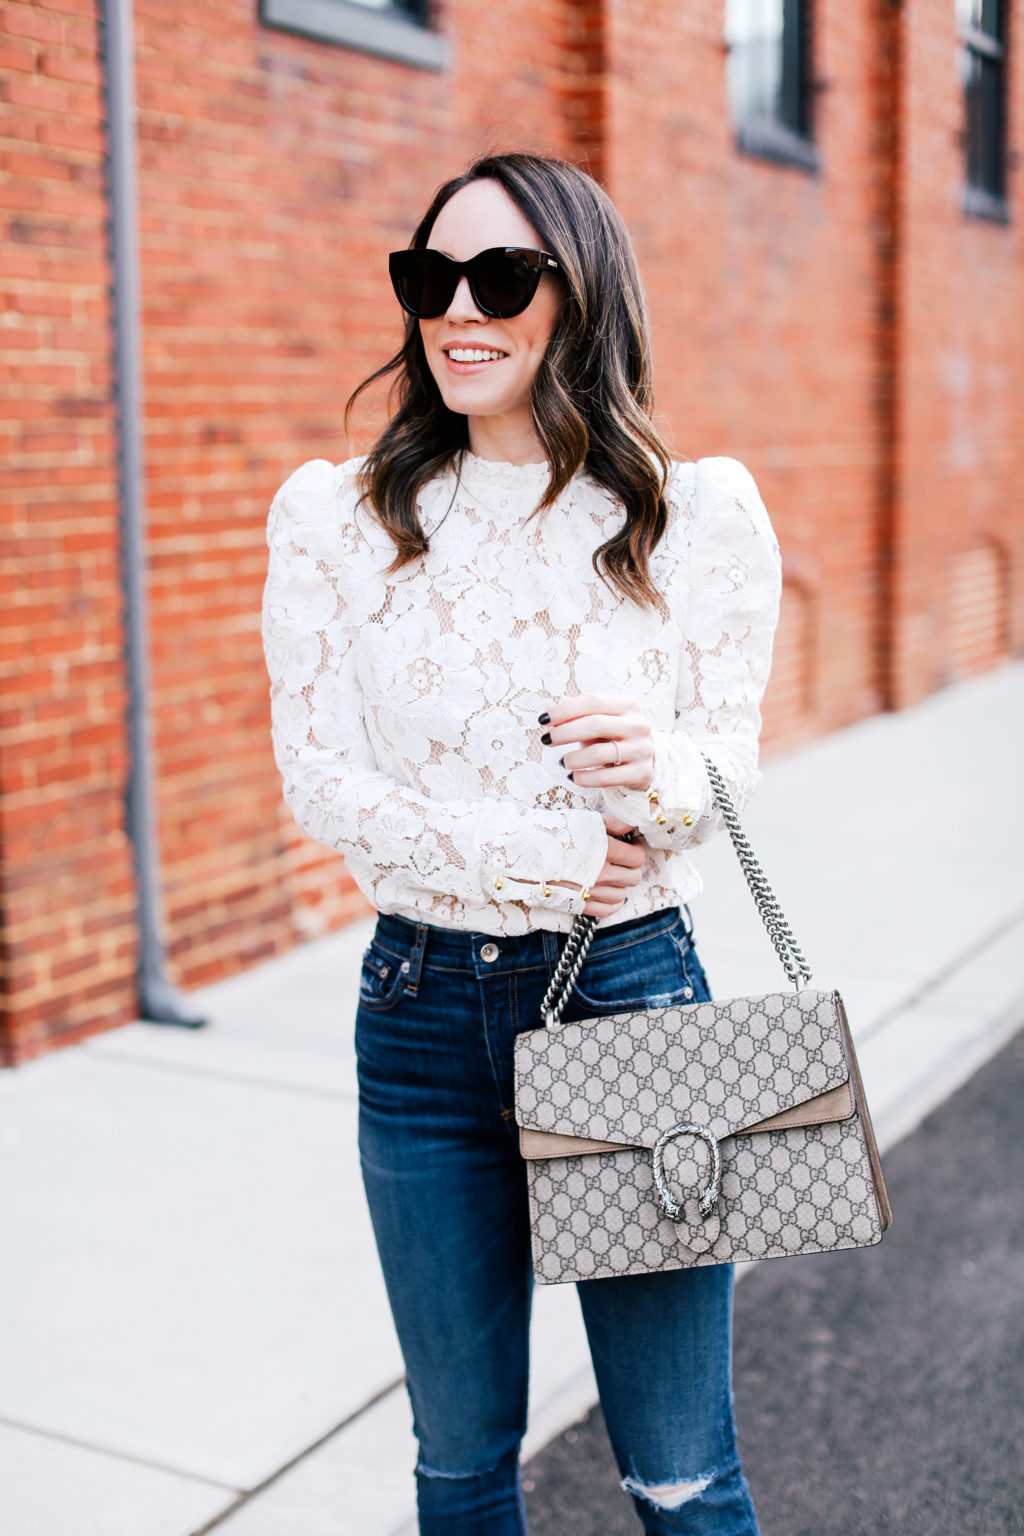 The Lace Top You Need For Spring - alittlebitetc